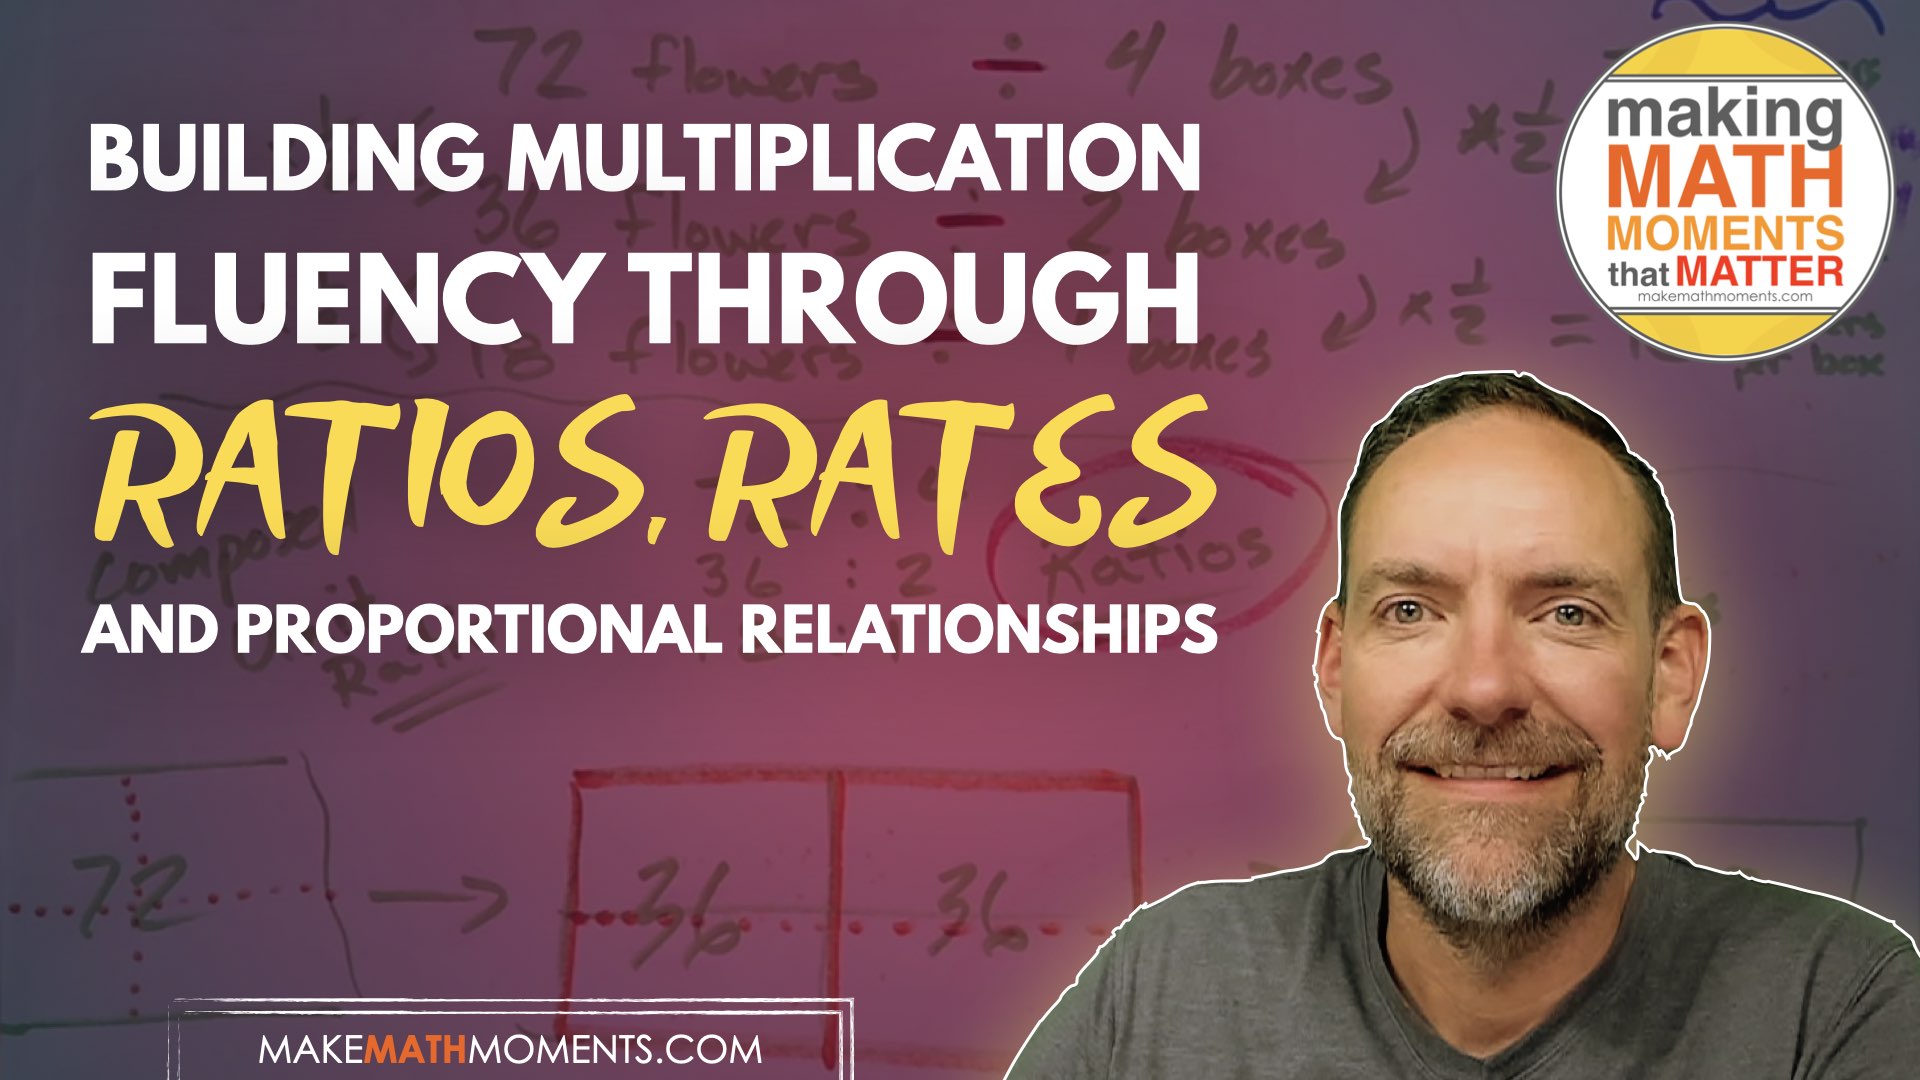 Building Multiplication Fluency Through Ratios, Rates and Proportional Relationships